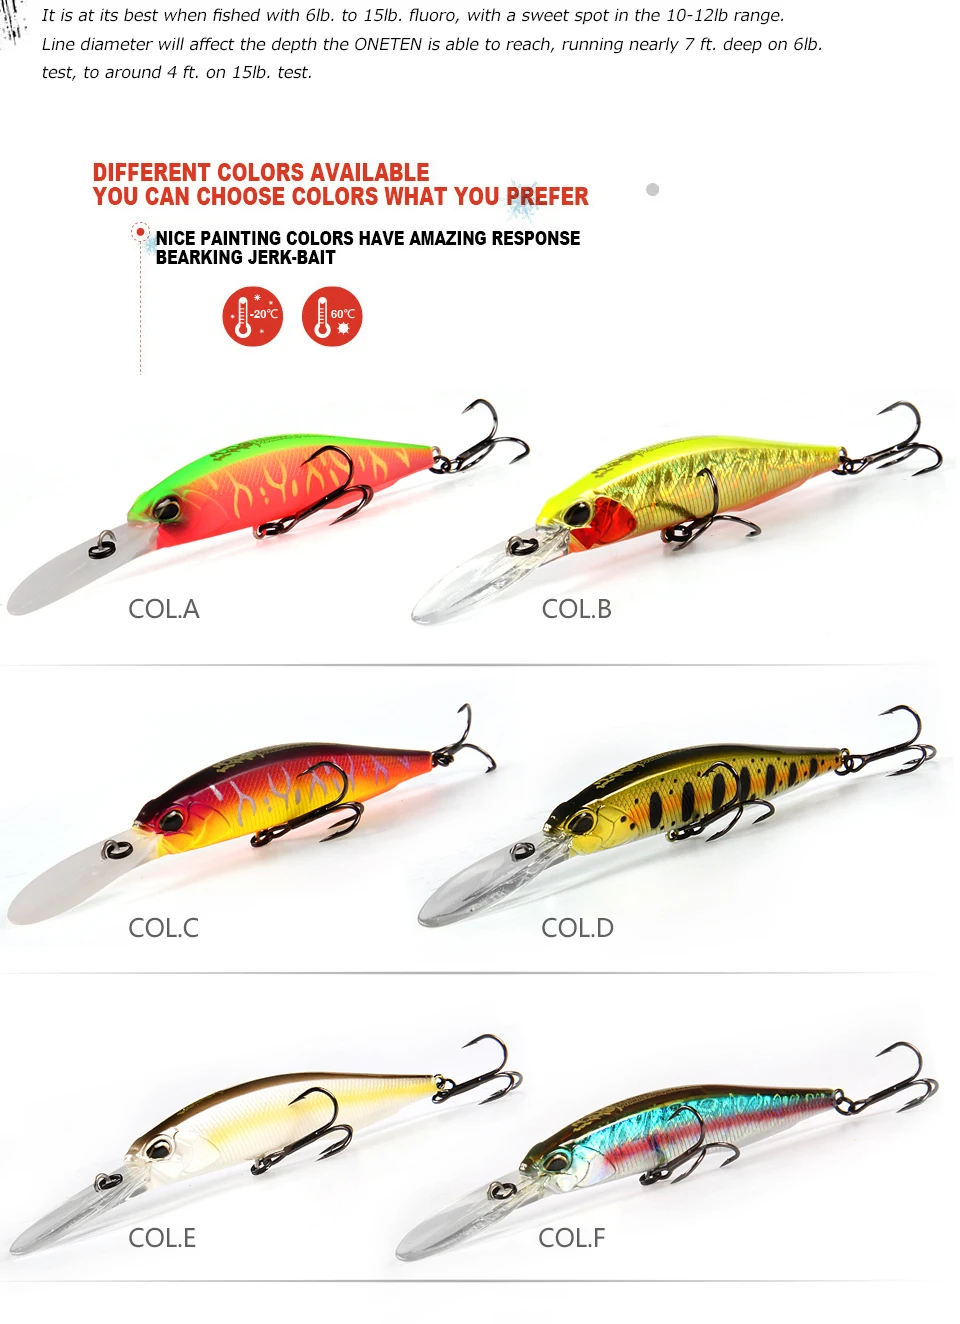 BEARKING 10cm 16g super magnet weight system long casting New model fishing lures hard bait 2019 quality wobblers minnow